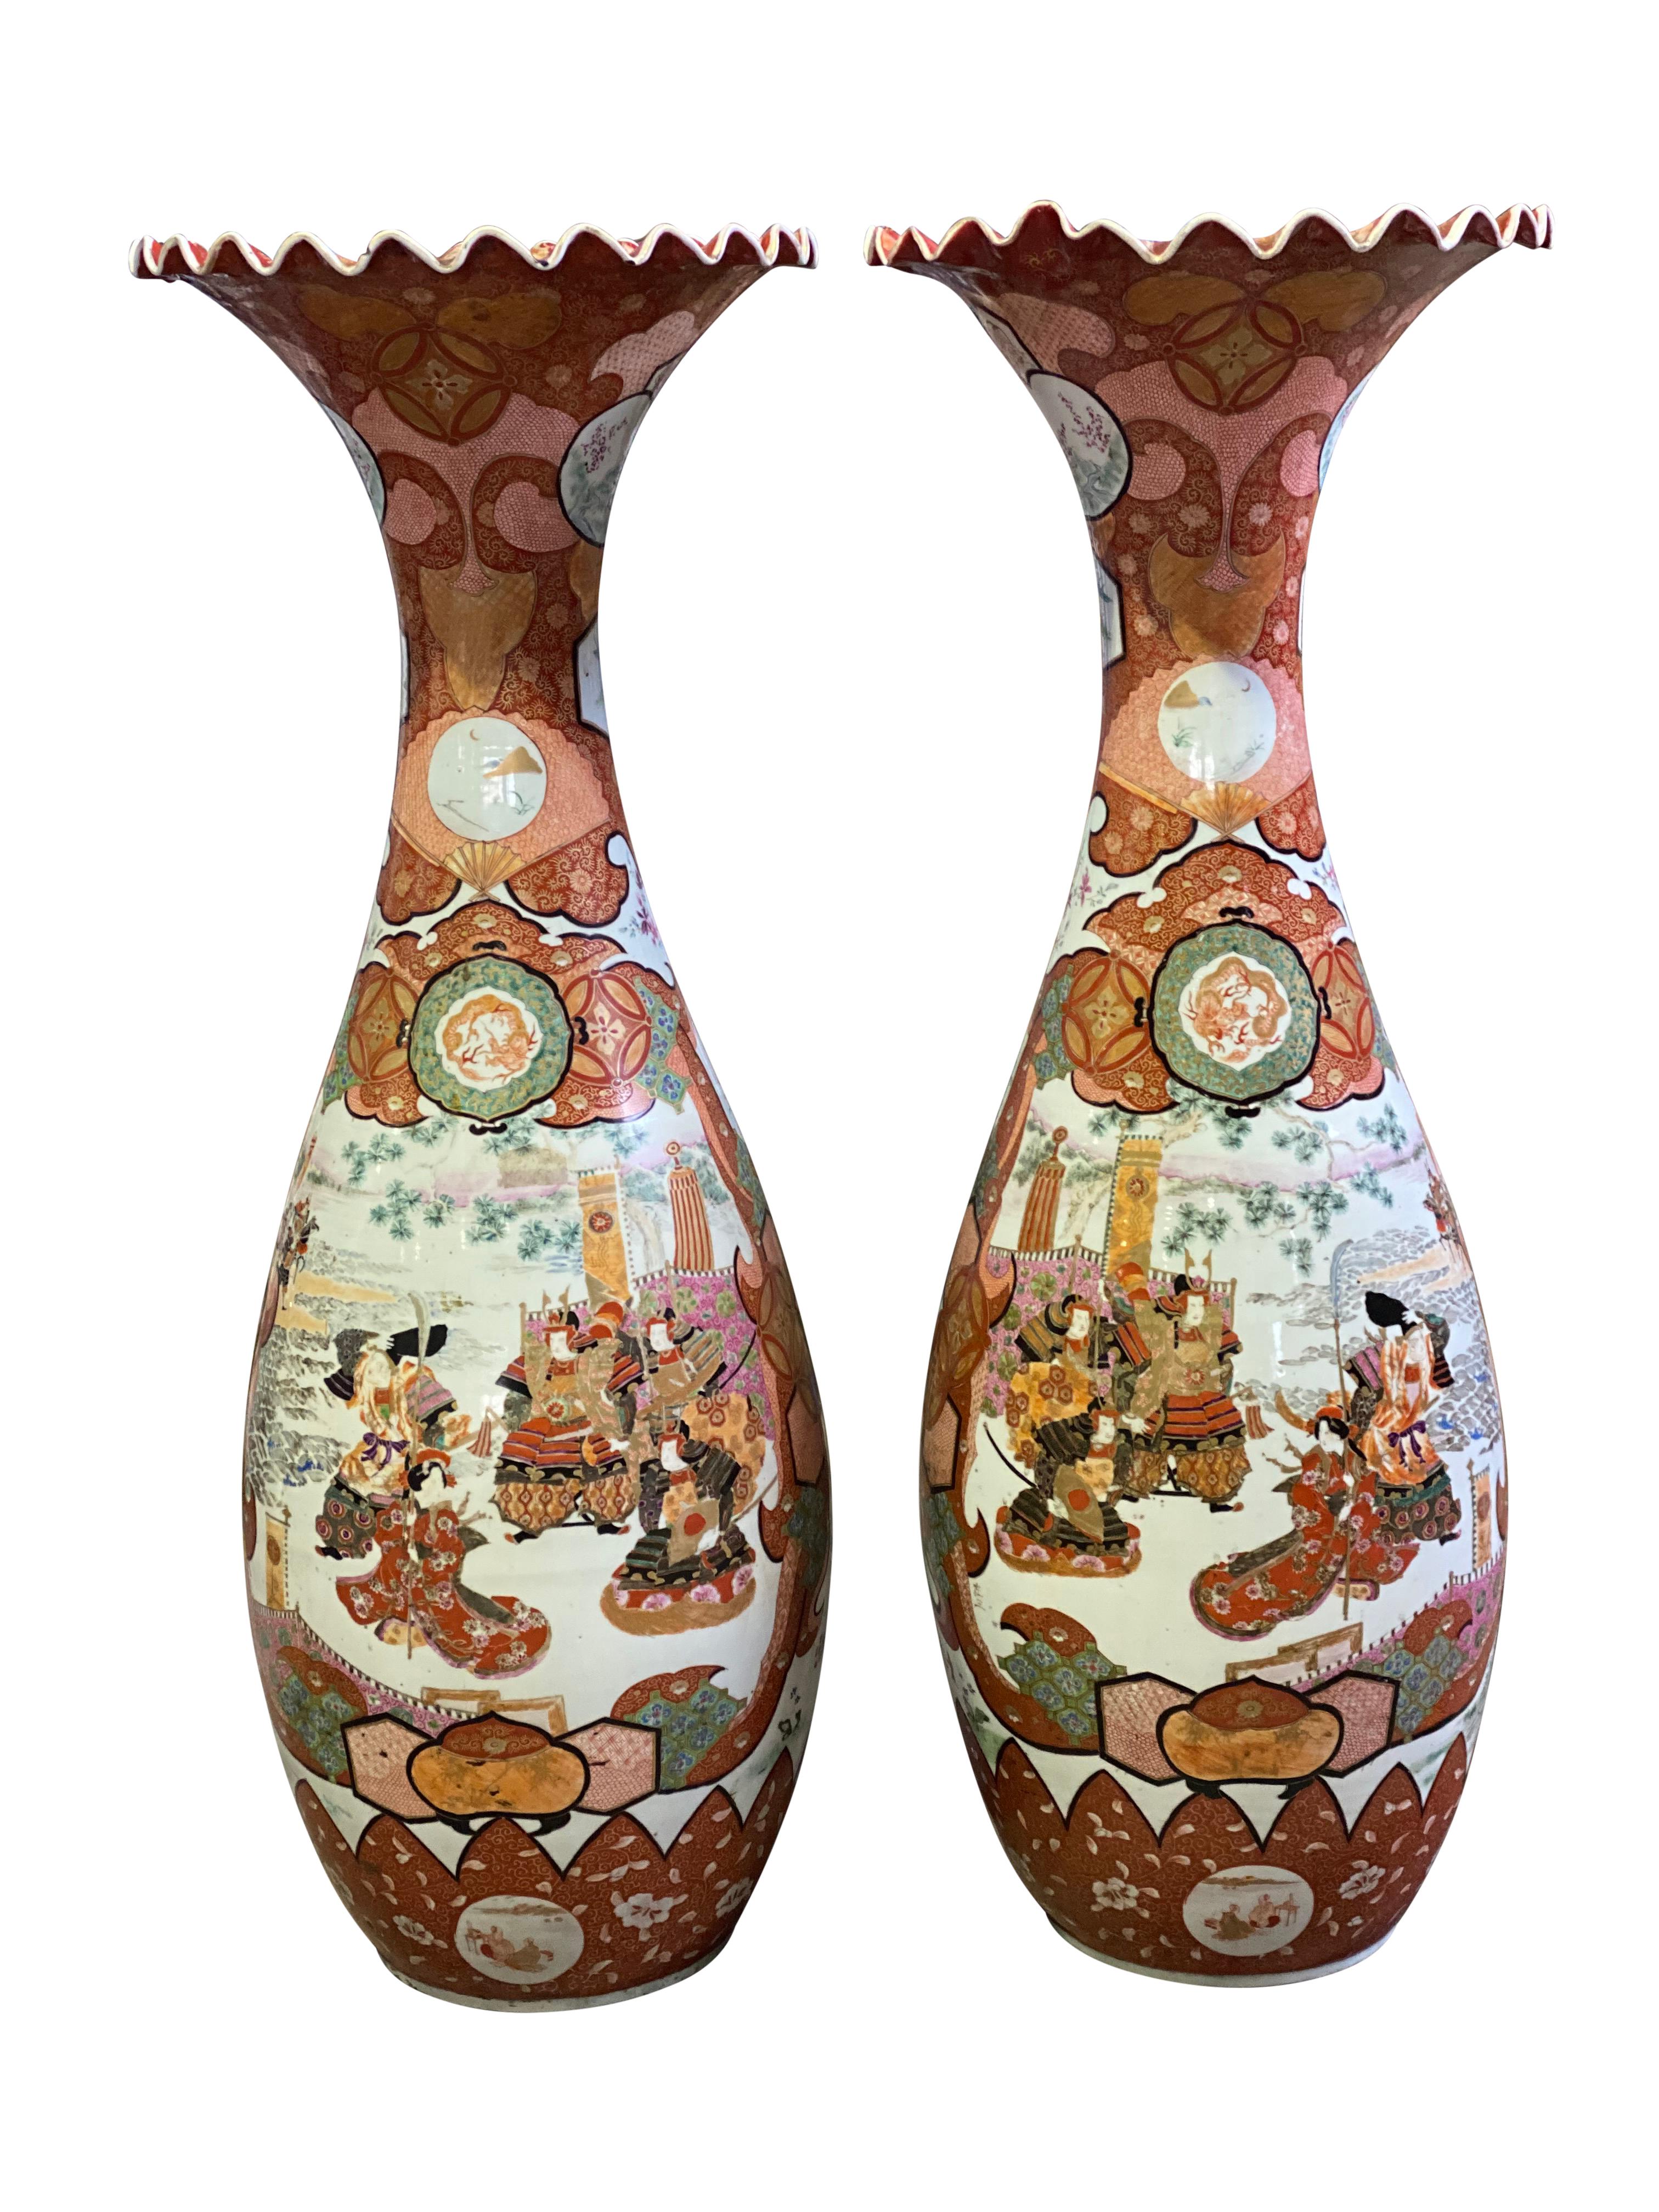 A pair of delightful 19th century antique vases, with globular body opening into ruffled rim with various flower heads inside the rim. The smooth bodies decorated in a traditional manner with blue, red, green and pink motifs, highlighted with floral